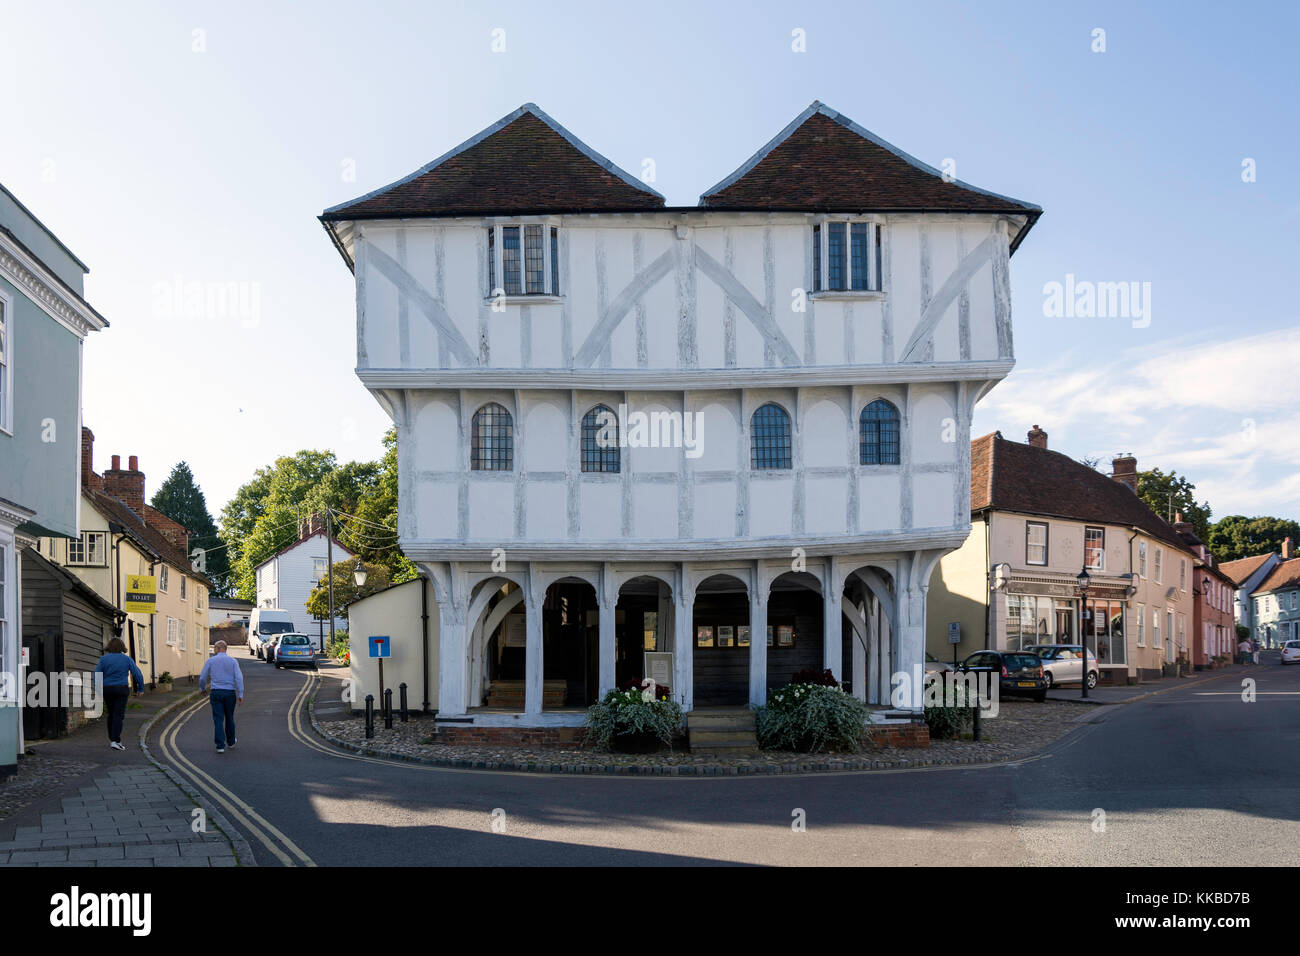 15th century Thaxted Guildhall, Town Street, Thaxted, Essex, England, United Kingdom Stock Photo